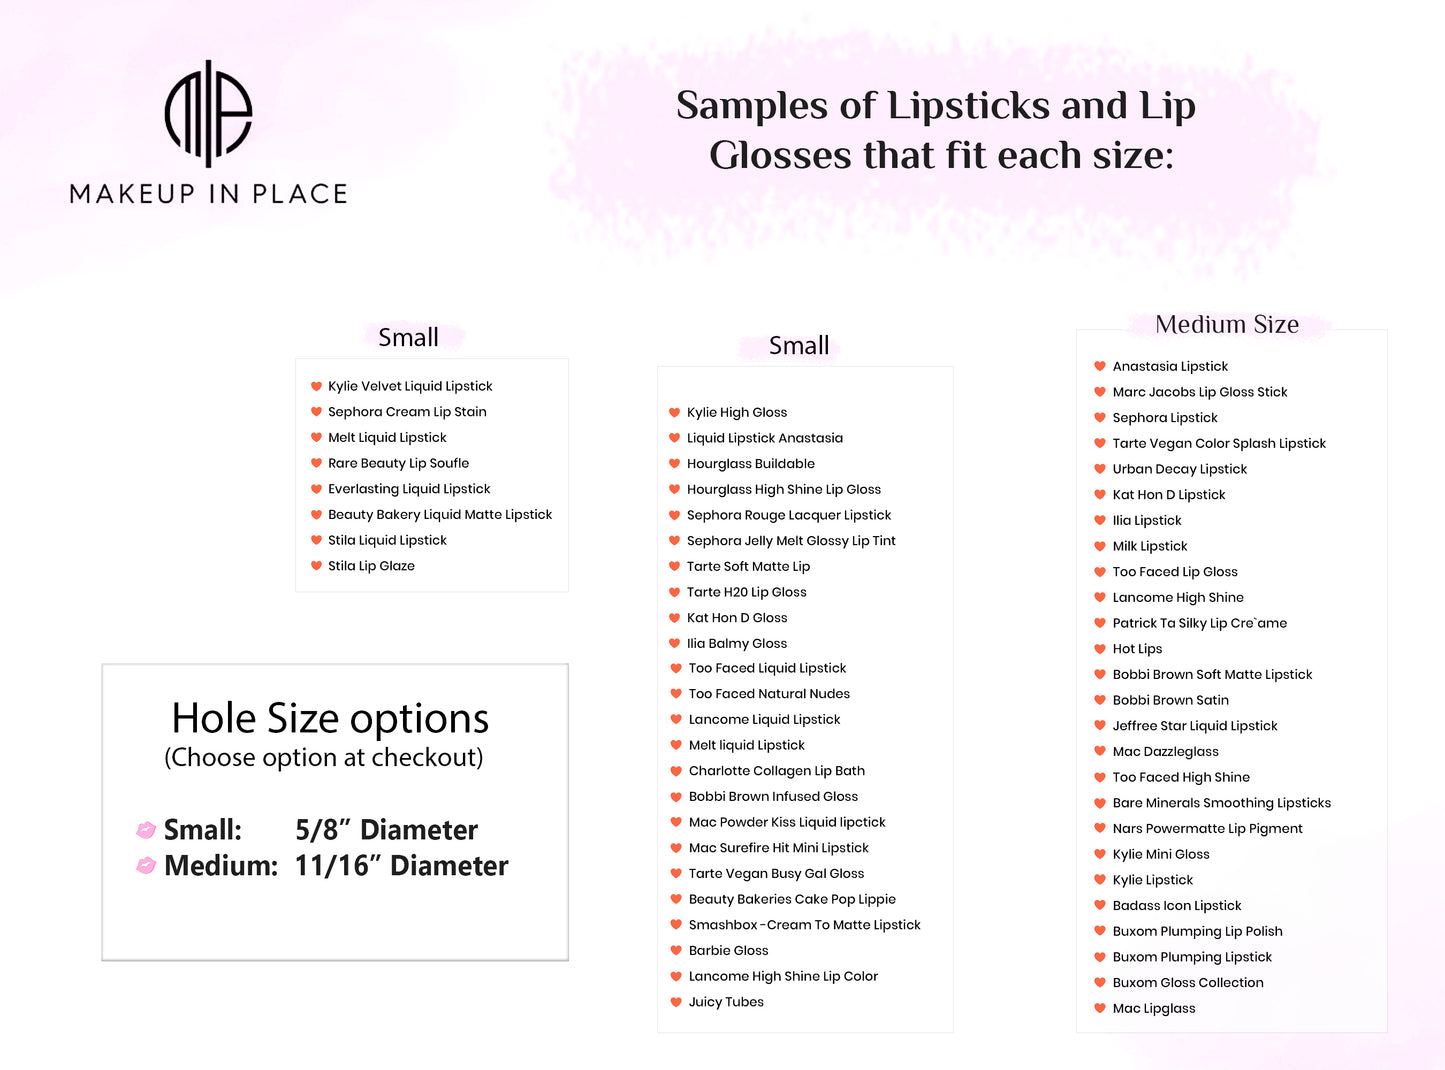 List of sample lipsticks and lip glosses that fit inside the circular holes on the wall hanging makeup organizer.